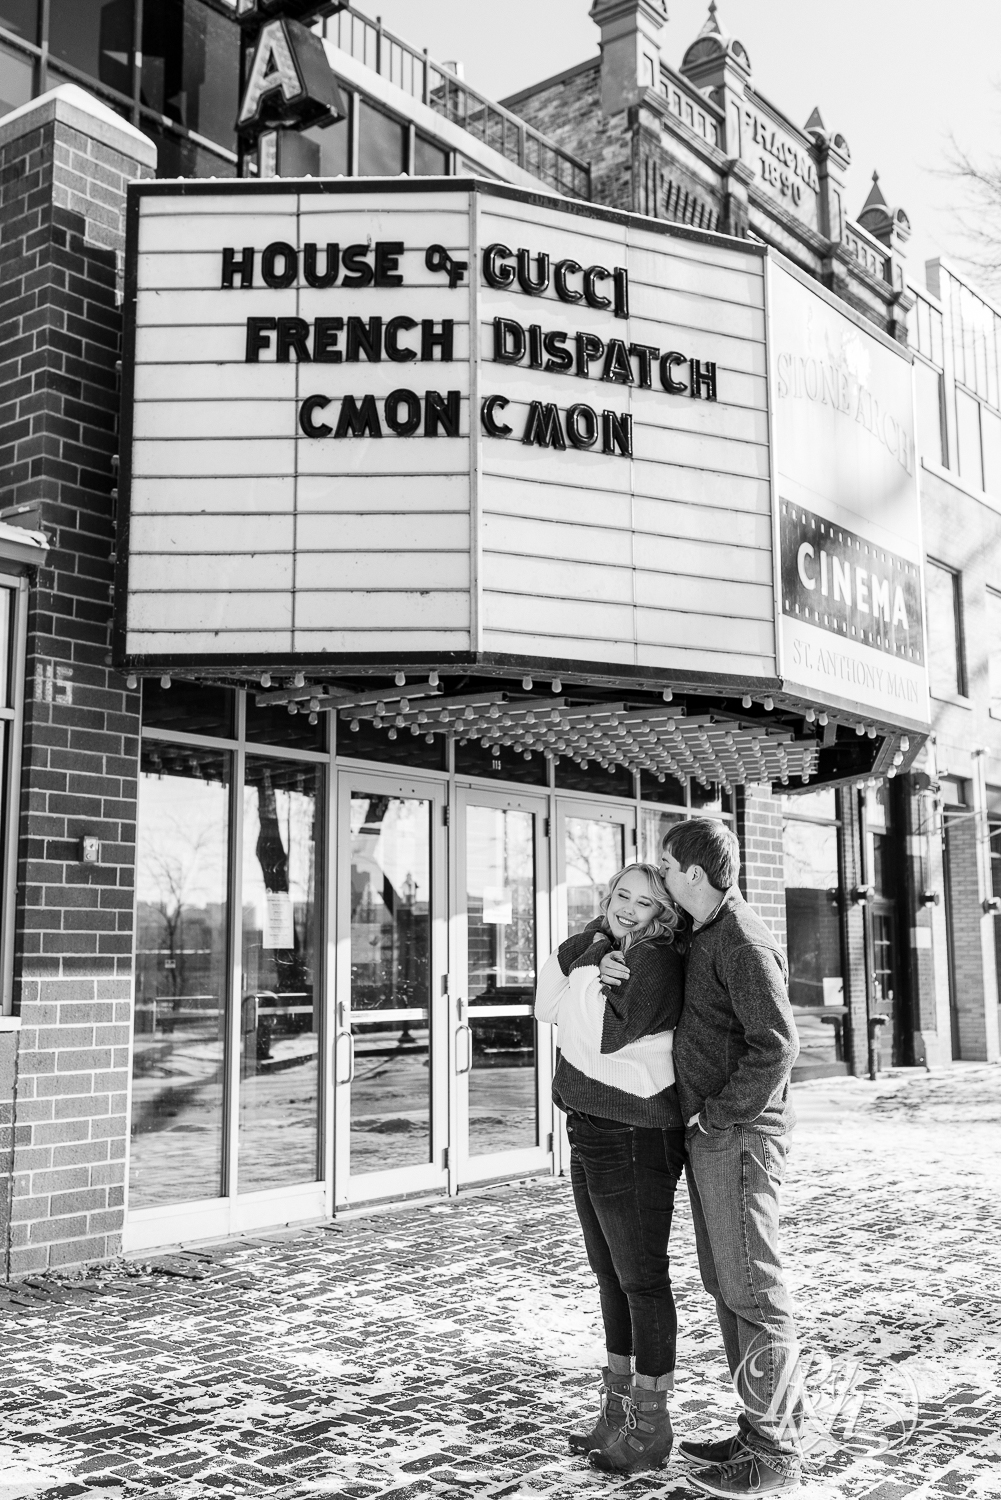 Man and woman snuggling in the snow in front of movie theater in Saint Anthony Main in Minneapolis, Minnesota.